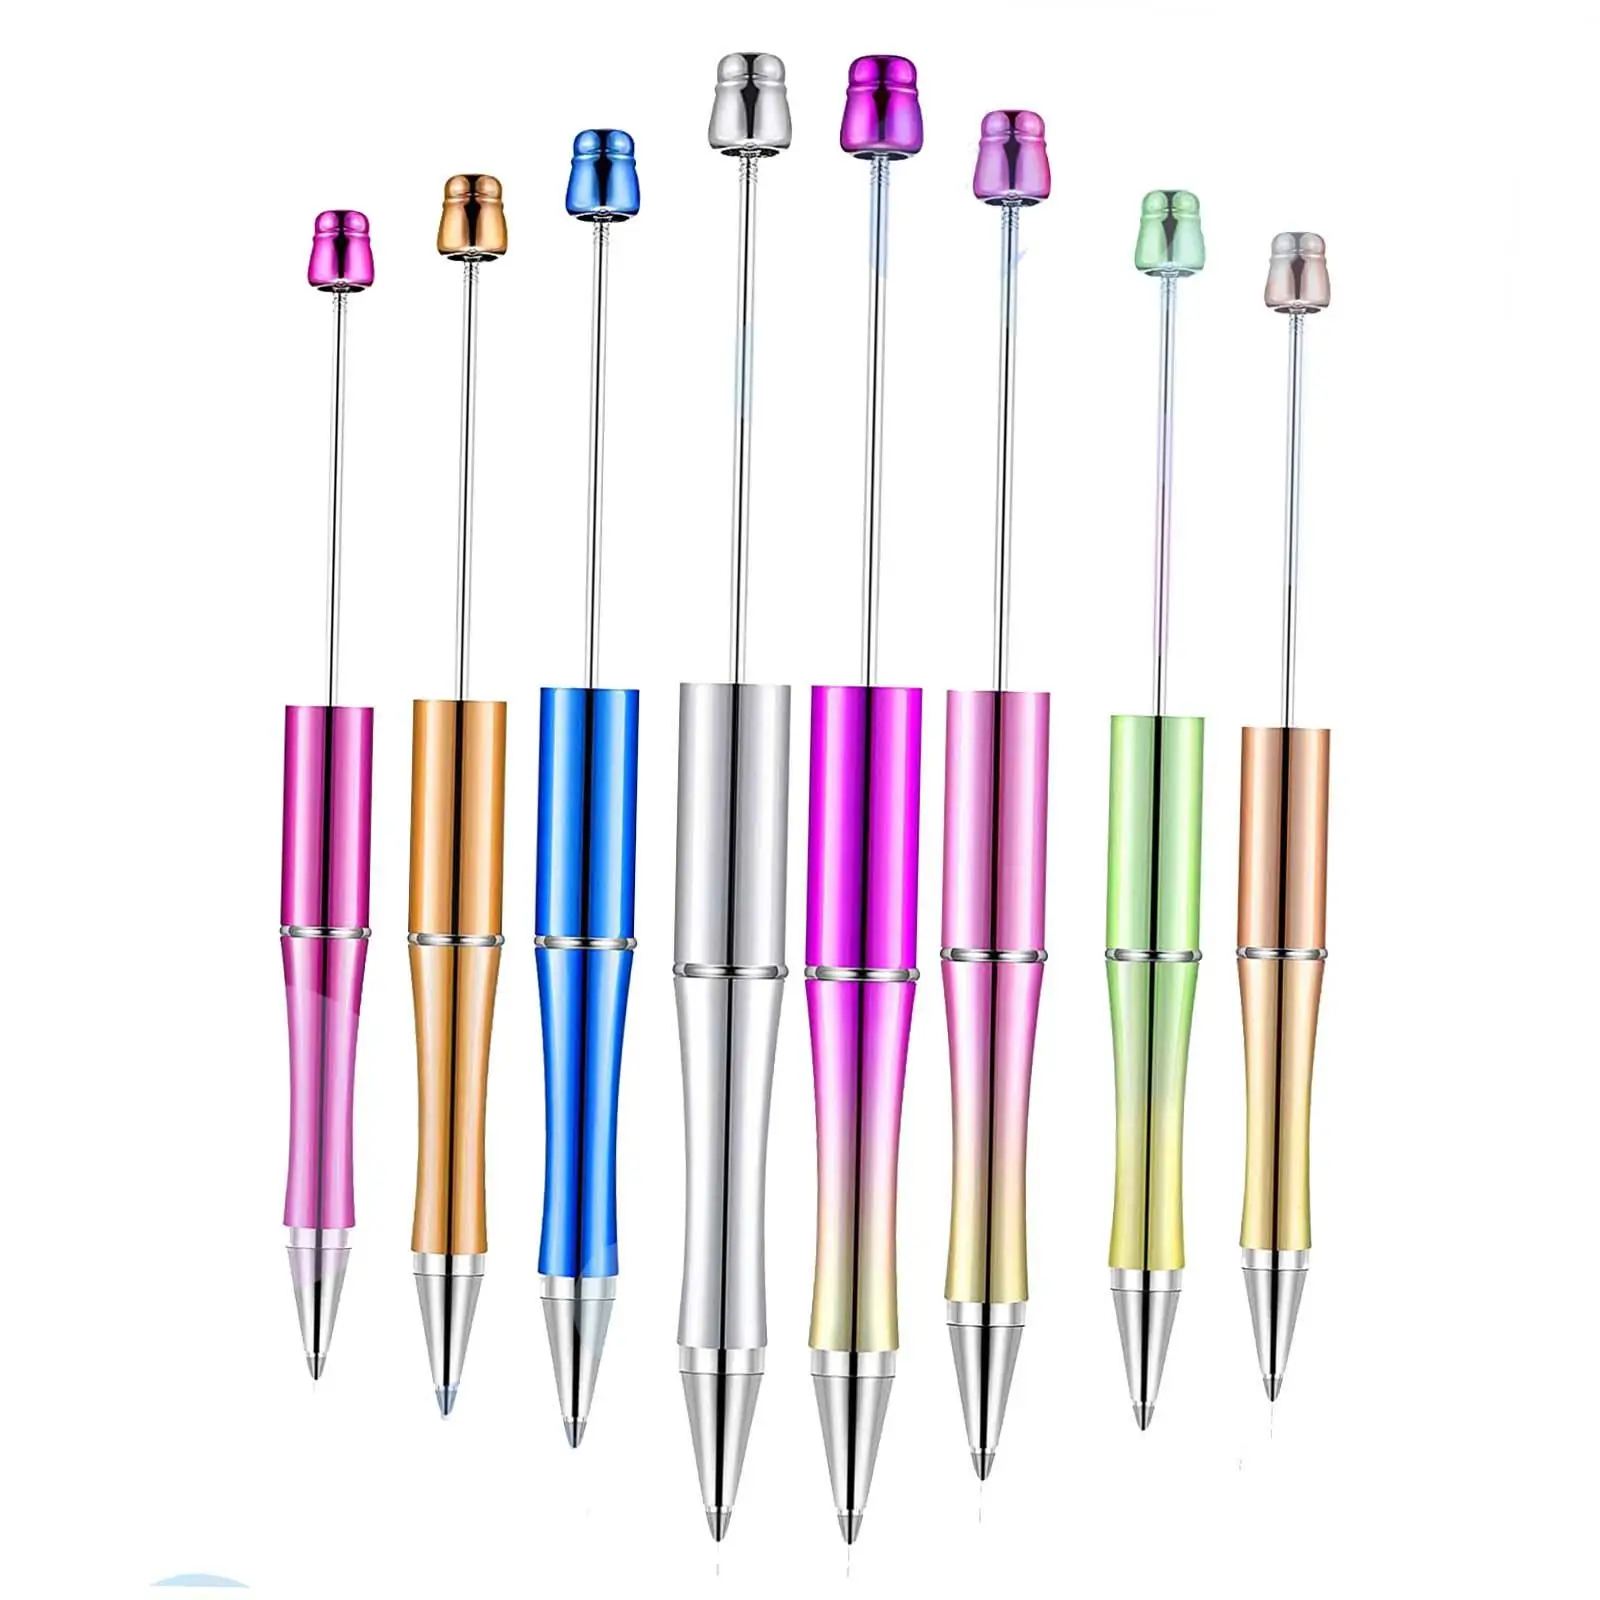 8x Rollerball Pen Creative 1mm Portable Printable Ballpoint Pen Beadable Pens for Drawing Taking Notes Exam Spare Gift Classroom